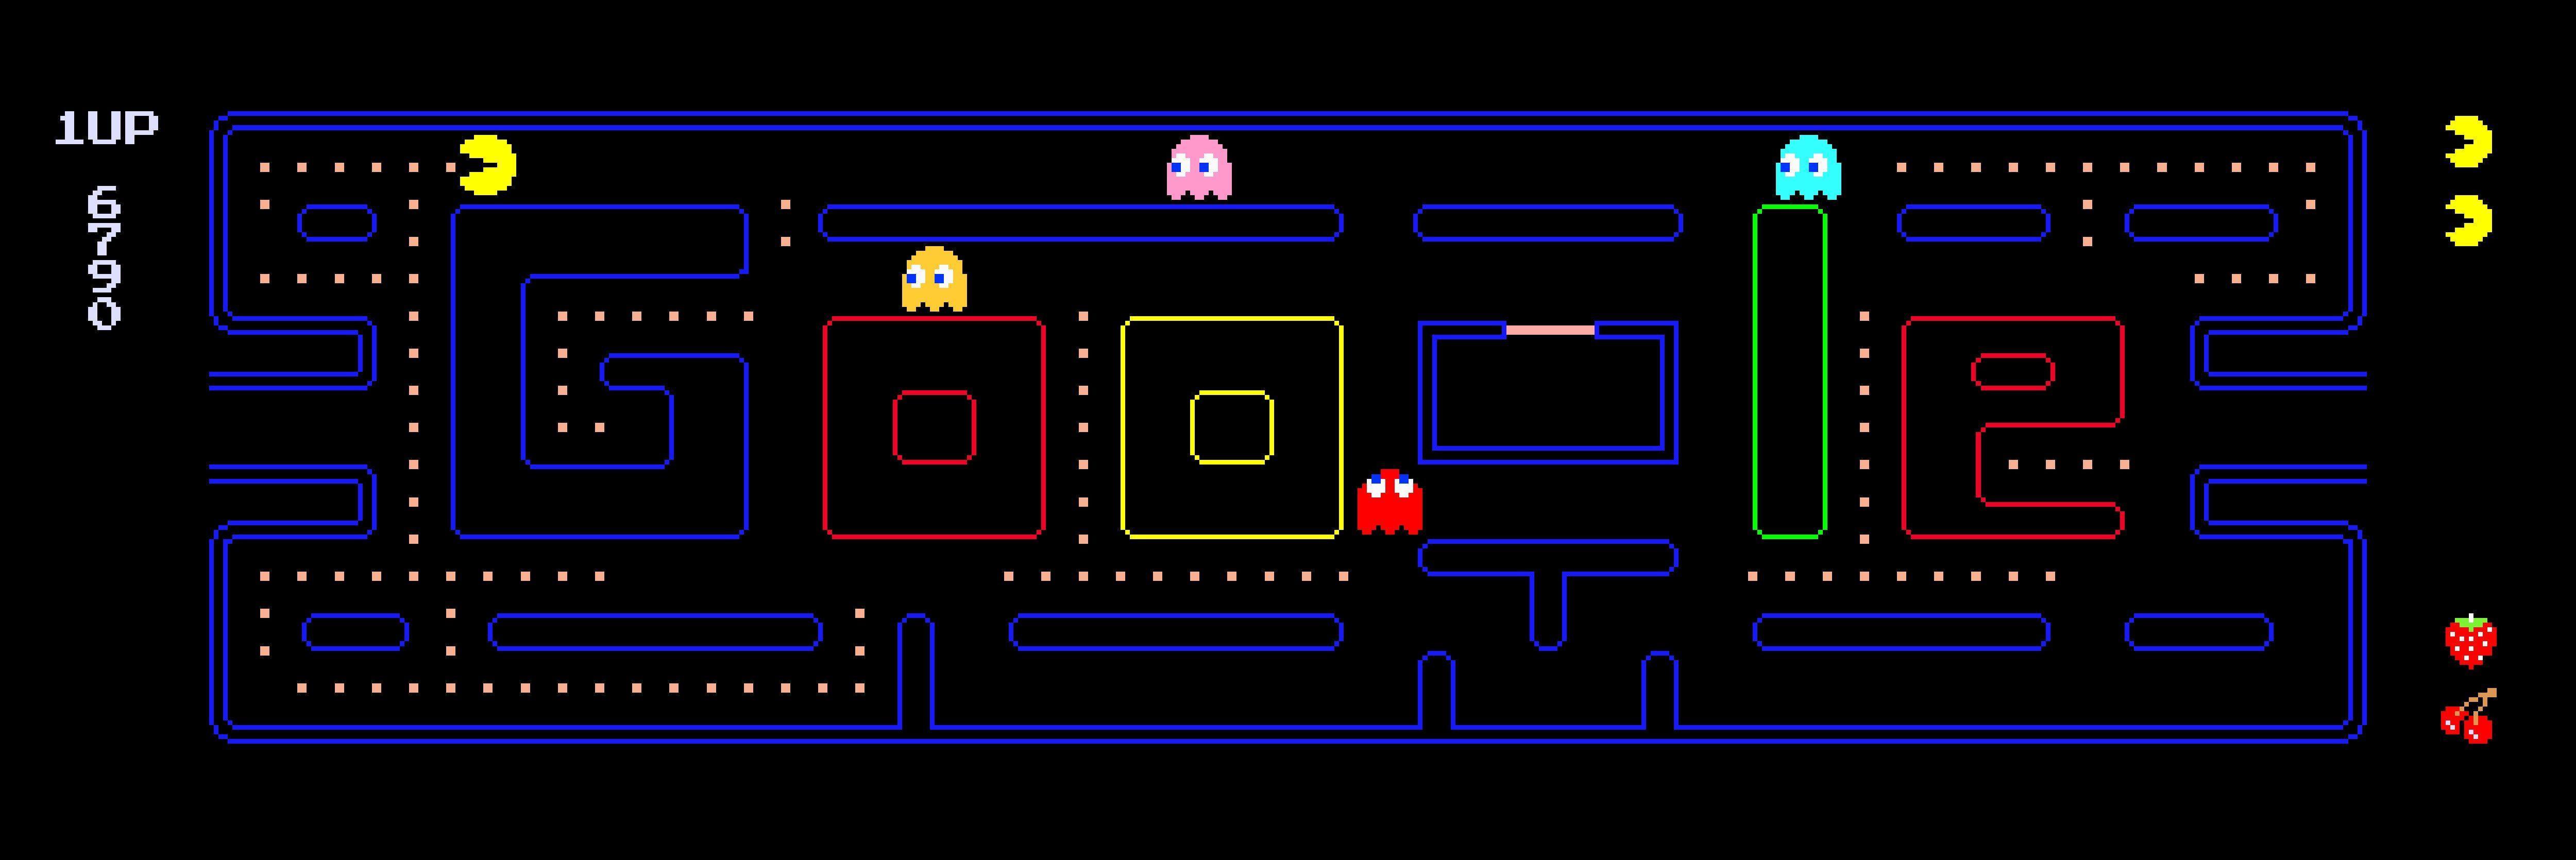 Interactive Google Logo - Interactive Google Doodle Celebrates Pac-Man's 30th | WIRED